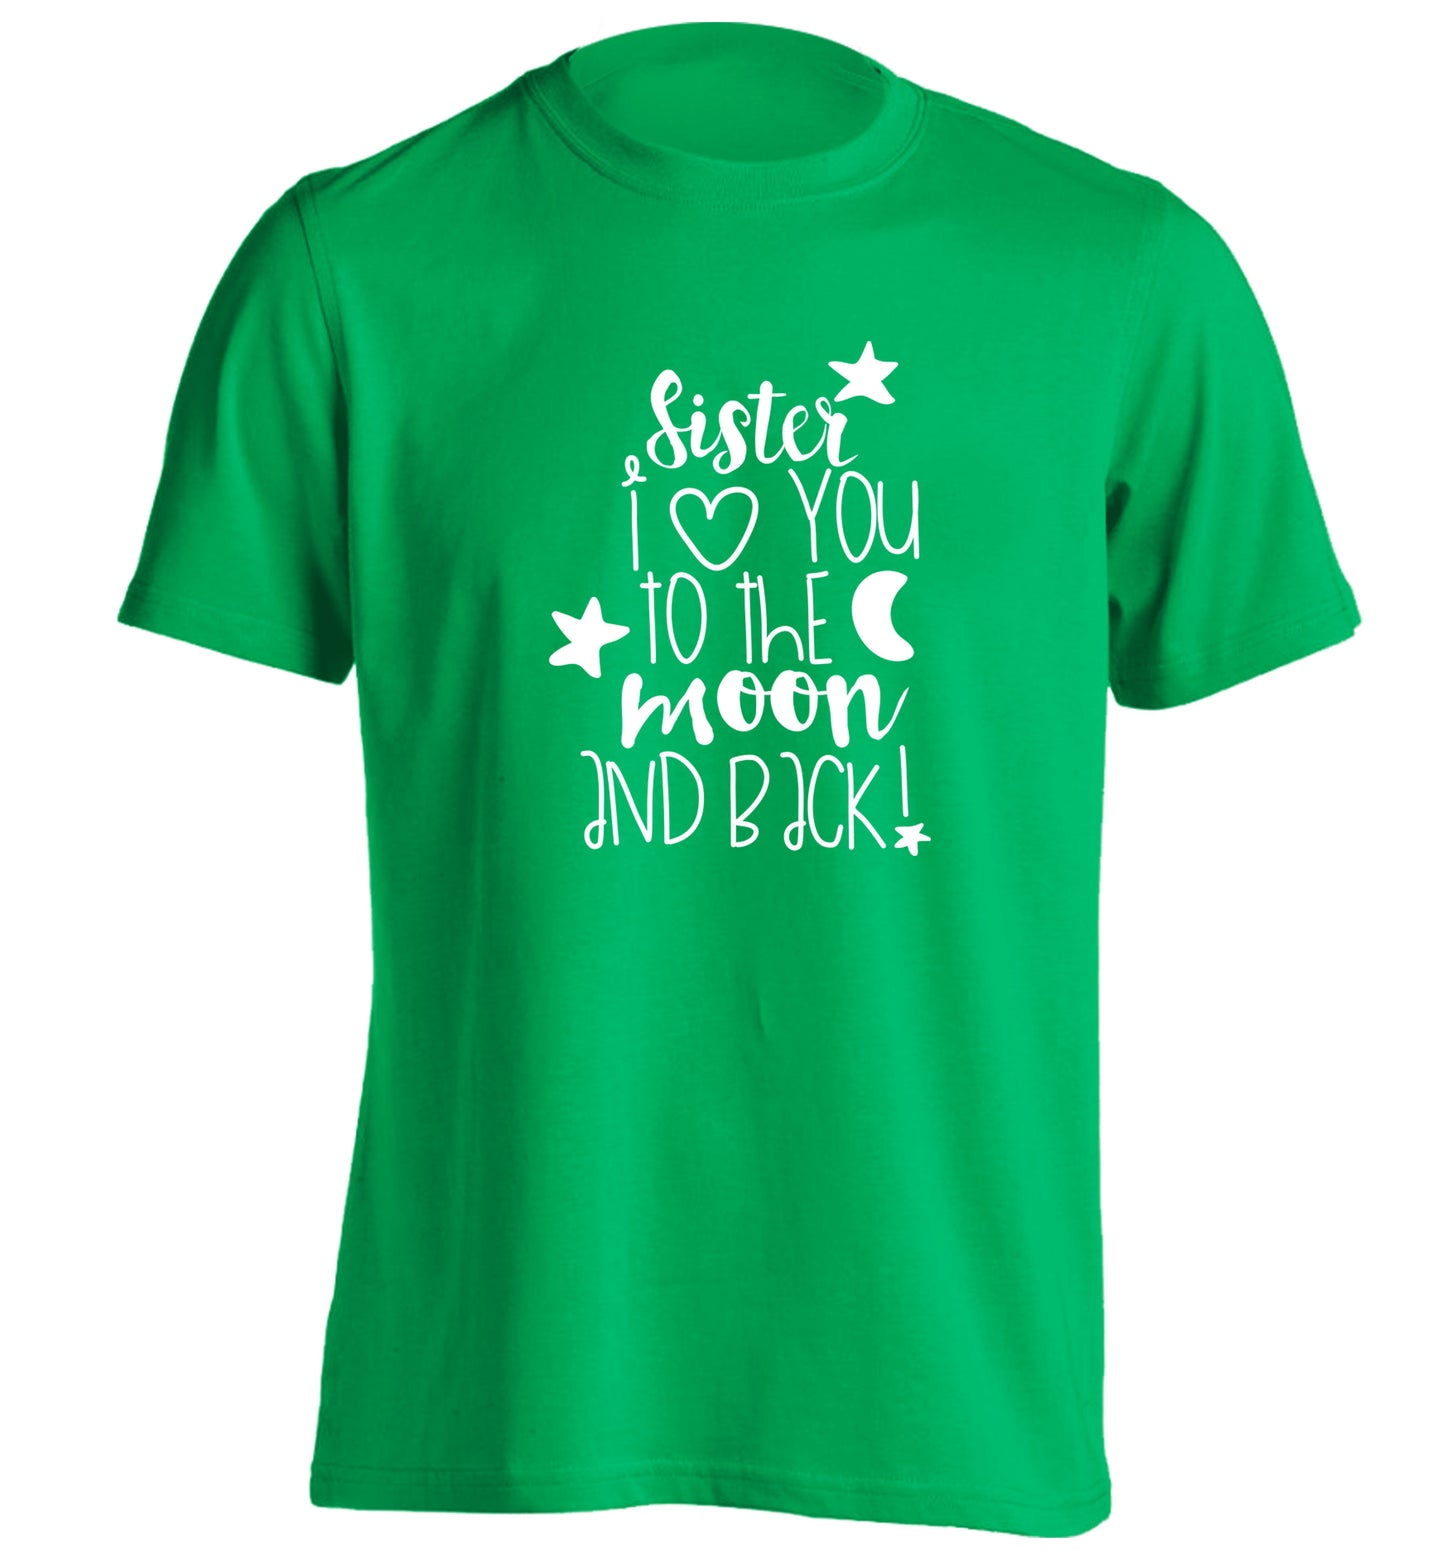 Sister I love you to the moon and back adults unisex green Tshirt 2XL